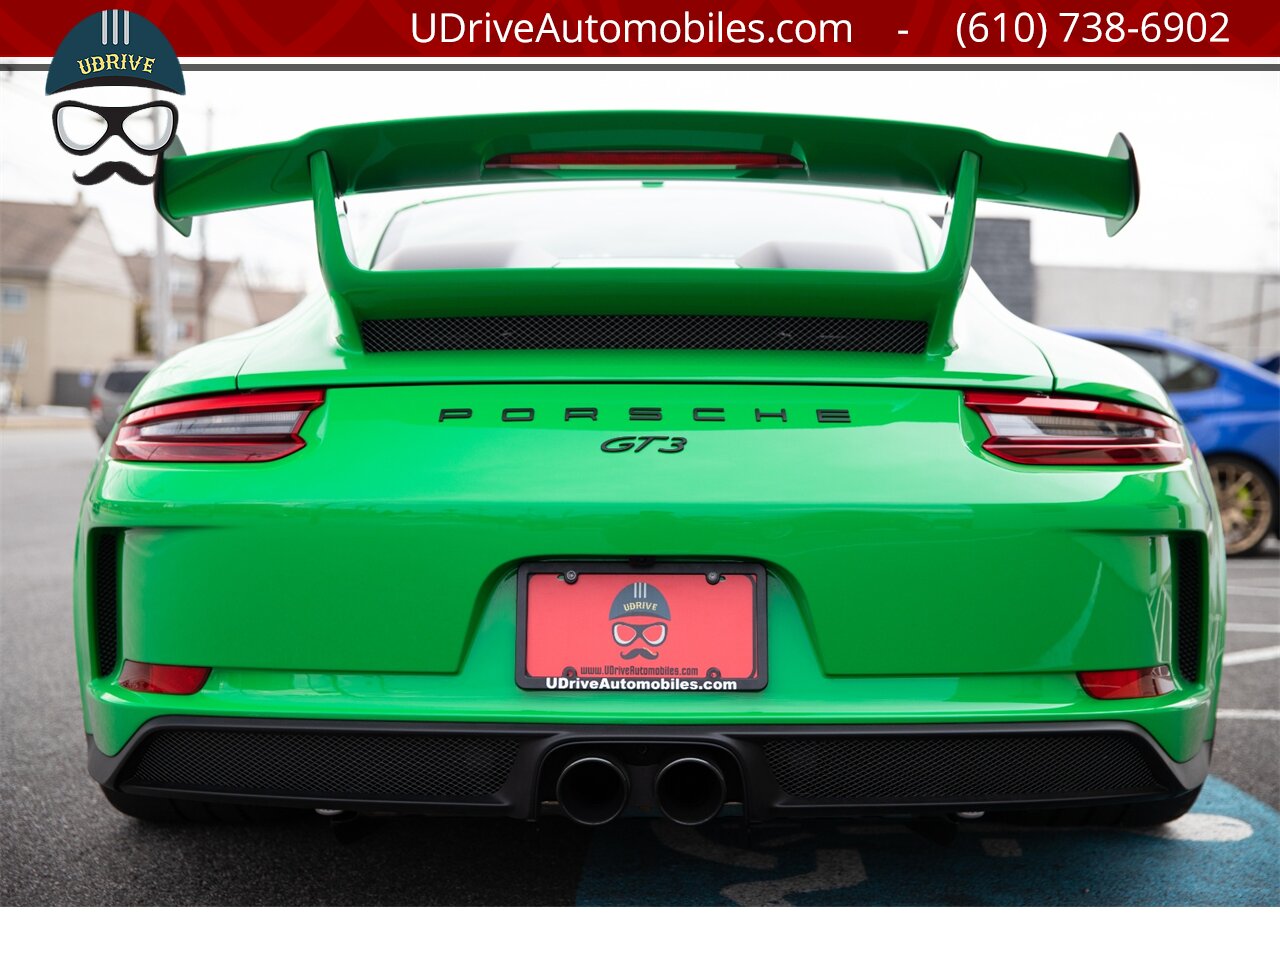 2018 Porsche 911 GT3 6 Speed Paint To Sample Viper Green 48 Miles  Front Axle Lift PCCB Carbon Bucket Seats - Photo 20 - West Chester, PA 19382